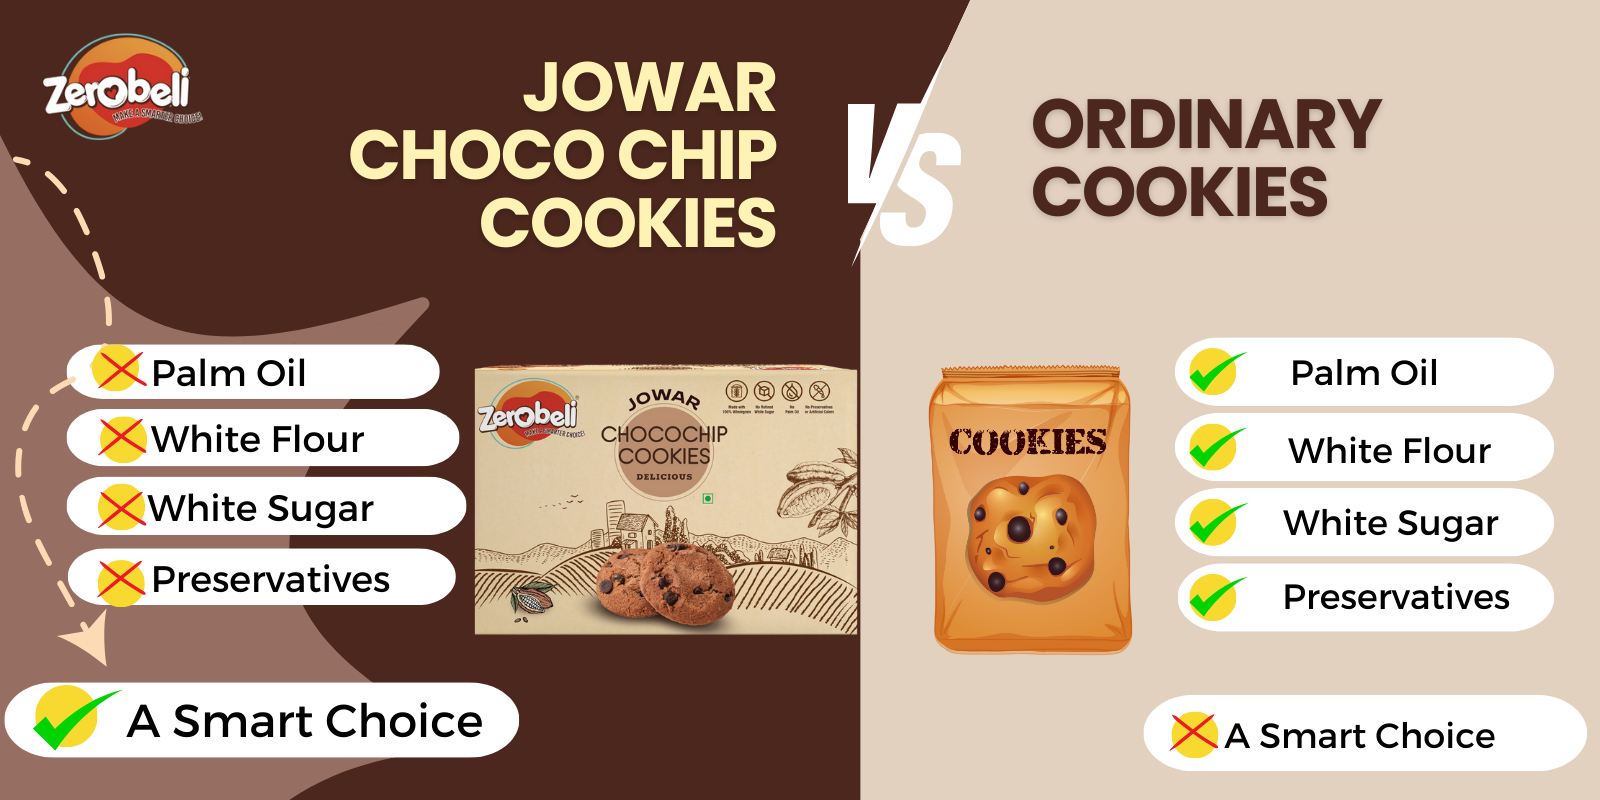 Jowar_Choco_chip_Cookie_Competition_e0fb33b2-a854-460b-a5d8-61fe7c8294f6.png